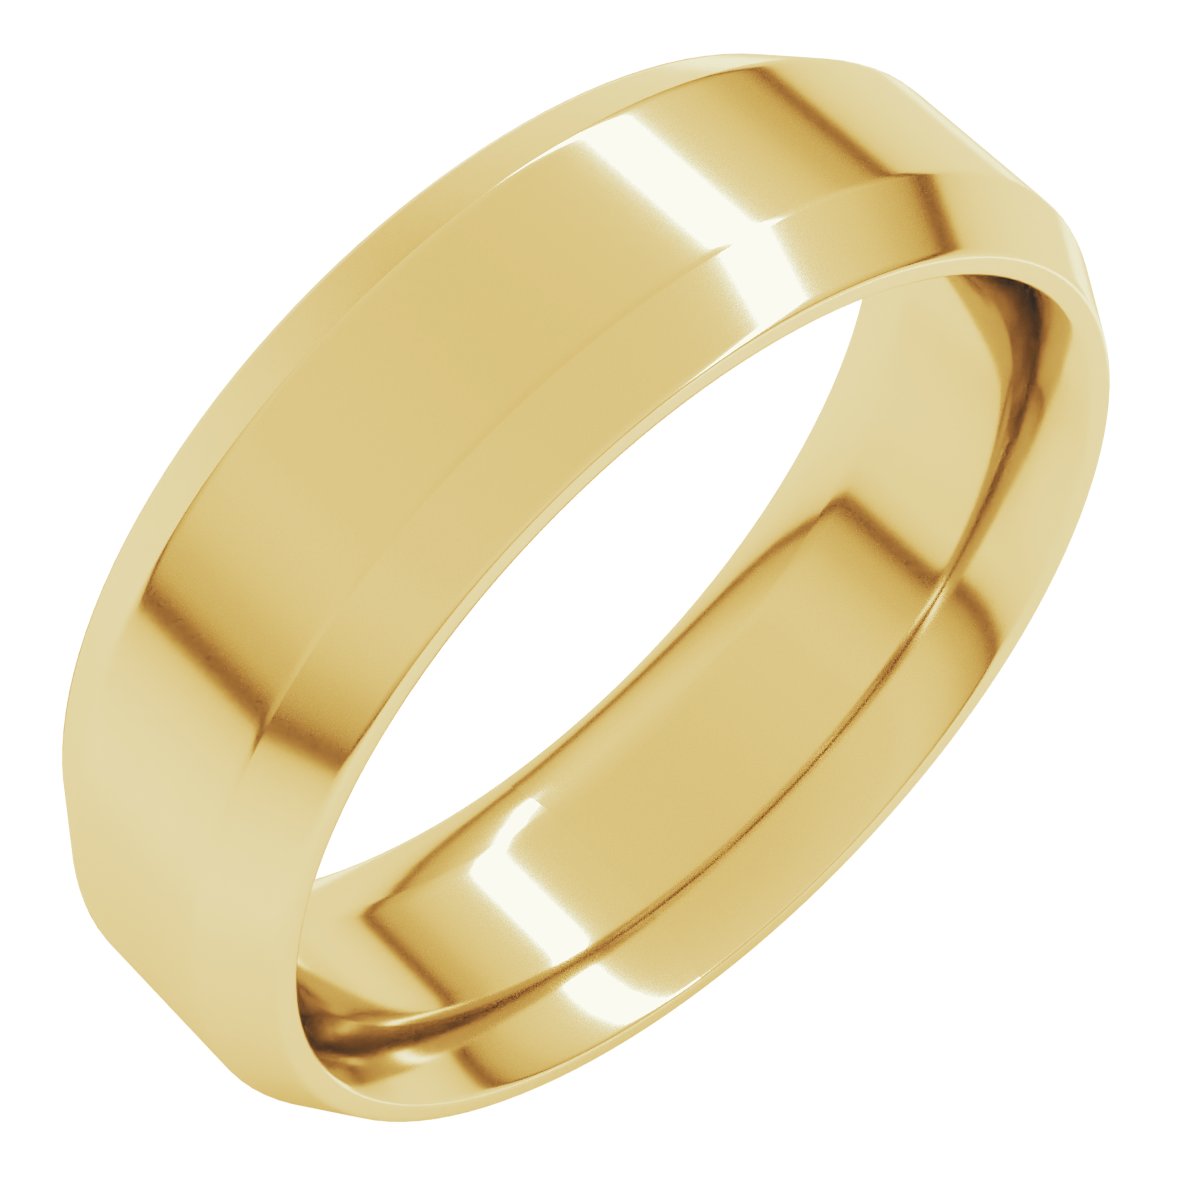 14K Yellow 6 mm Beveled-Edge Comfort-Fit Band Size 9